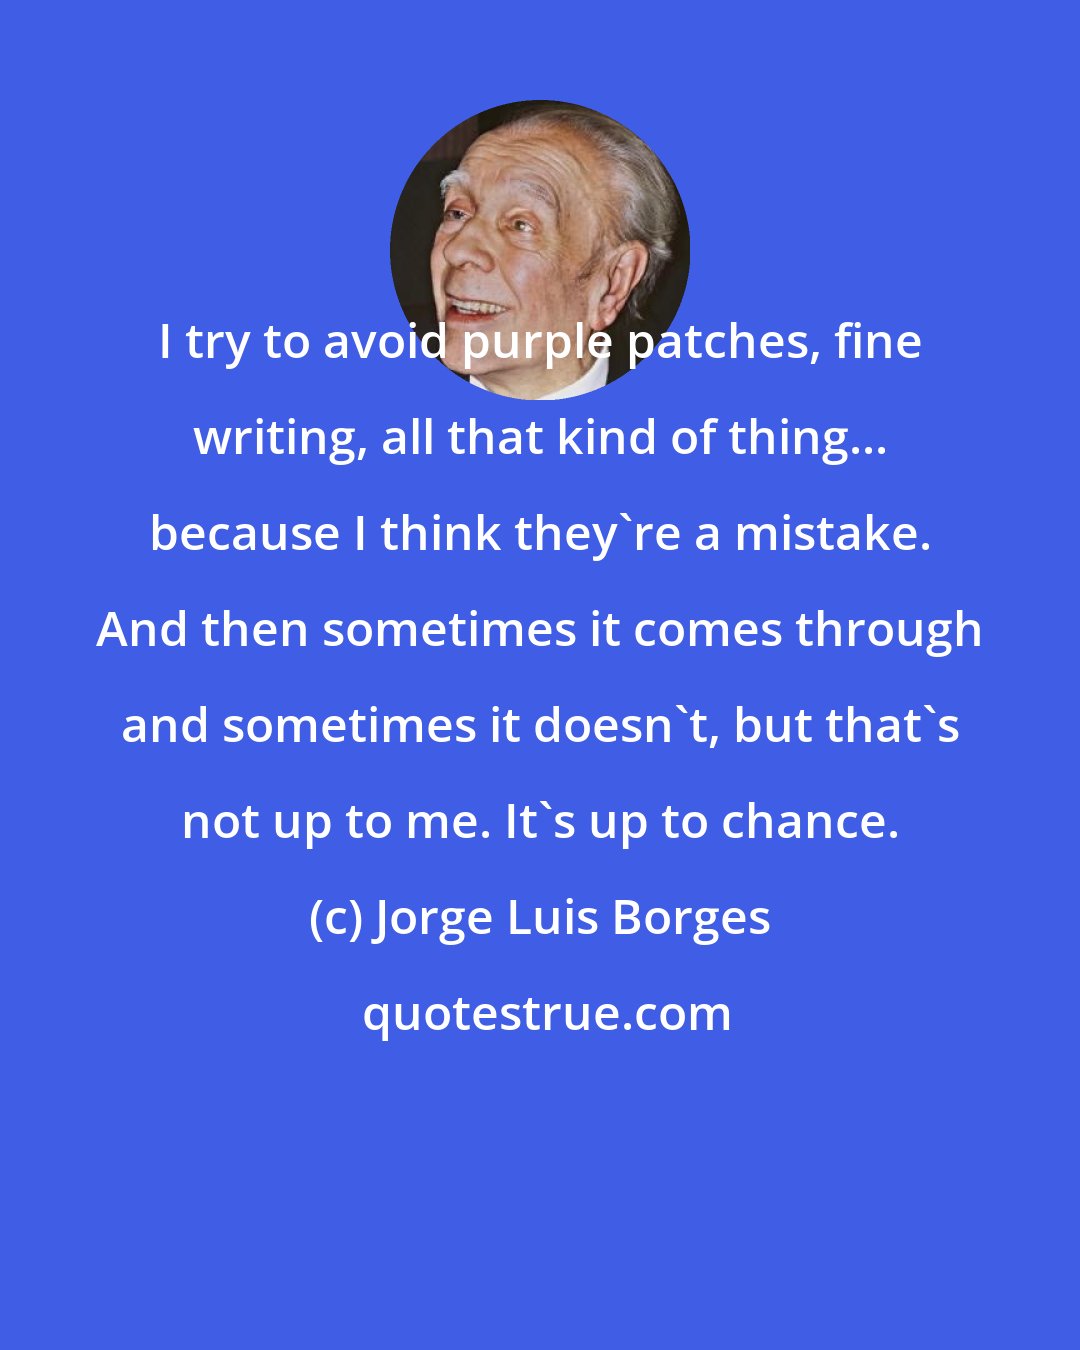 Jorge Luis Borges: I try to avoid purple patches, fine writing, all that kind of thing... because I think they're a mistake. And then sometimes it comes through and sometimes it doesn't, but that's not up to me. It's up to chance.